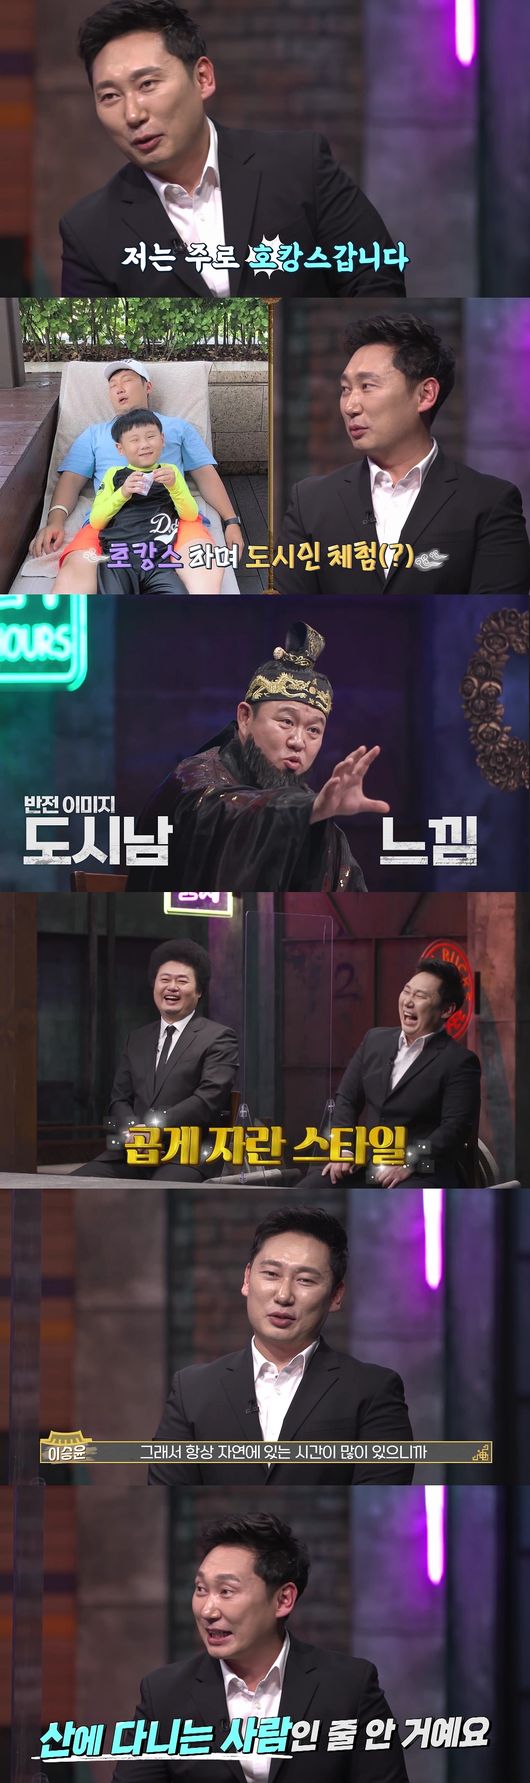 Lee Seung-Yoon, a semi-natural person, shows off his charm of anti-City Boy, saying, I usually enjoy hocance.The MBN entertainment program God and the Blessed Edition, which will air today (13th), will feature a 10-year MC Yoon Taek and Lee Seung-Yoon of I am a Natural Person, followed by a two-time Dead Again talk for the second life.The two men, who have landed in the barren nature and the underworld, are expected to draw a candid talk as they will be, from the mysterious events that have been experienced during the filming of the popular liberal arts program Nature, which leads to the Healing Guide for Modern People to the deep life talk that no one knew.On the same day, Gim Gu-ra, the great king of the Great, asked Lee Seung-Yoon, I have a technique to play in nature, so I think I will play a lot with my family outdoors.Lee Seung-Yoon showed off the unexpected image of City Nam, saying, I usually enjoy hocance.I always have a lot of time in nature, so I usually experience the city while doing a hoc, he said.I talk to my family a lot, and when I am in City, I try to enjoy City as much as possible, he appealed to the city boy charm.Lee Seung-Yoon also said, When my child was young, I thought Father was going to the mountain every day, so I thought he was going to the mountain. My son was a second grader in elementary school, but now he is a comedian.I like it very much because Im doing the gag program again these days. I laugh a lot while watching it.3MC The true Dead Again Life Talk Talk show God and Blessing, in which Gim Gu-ra, the Great King of Gura, Doh Kyung-wan and Herdeville Hur Kyung-hwan pick up the curiosity of the world, is broadcast every Sunday night at 9:50 pm.MBN is provided.